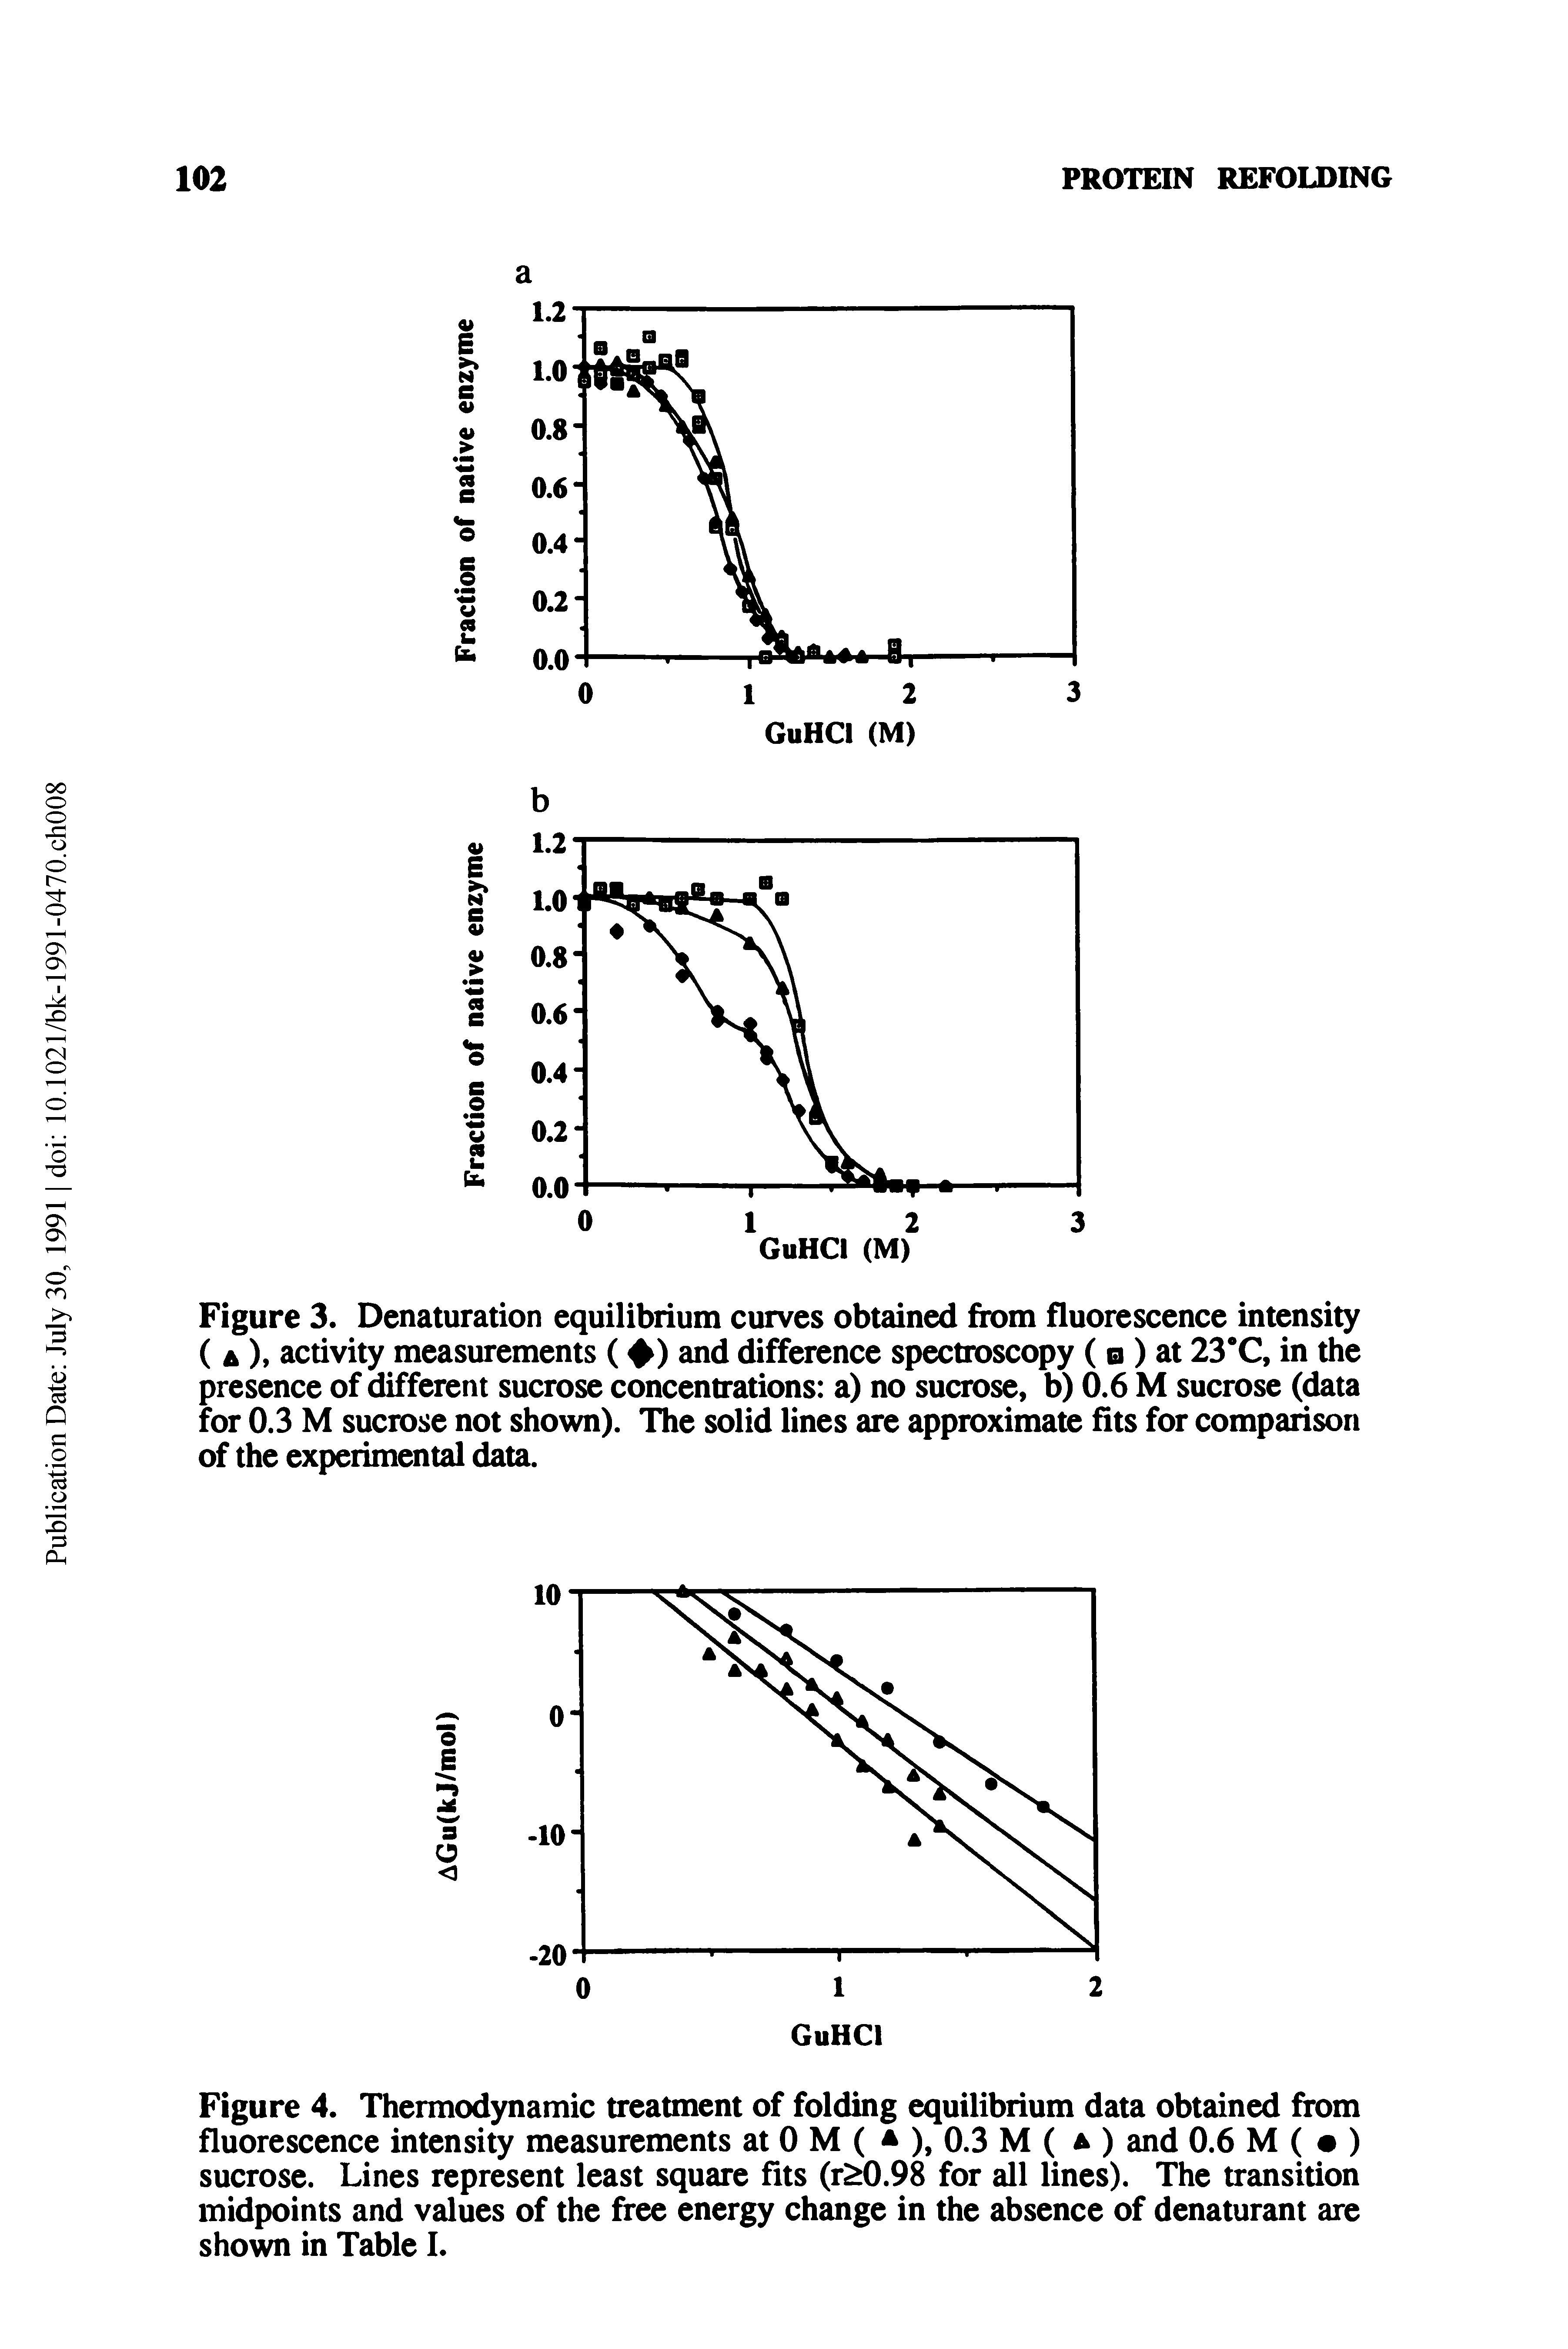 Figure 3. Denaturation equilibrium curves obtained from fluorescence intensity ( A ), activity measurements ( and difference spectroscopy ( a ) at 23 C, in the presence of different sucrose concentrations a) no sucrose, b) 0.6 M sucrose (data for 0.3 M sucrose not shown). The solid lines are approximate fits for comparison of the experimental data.